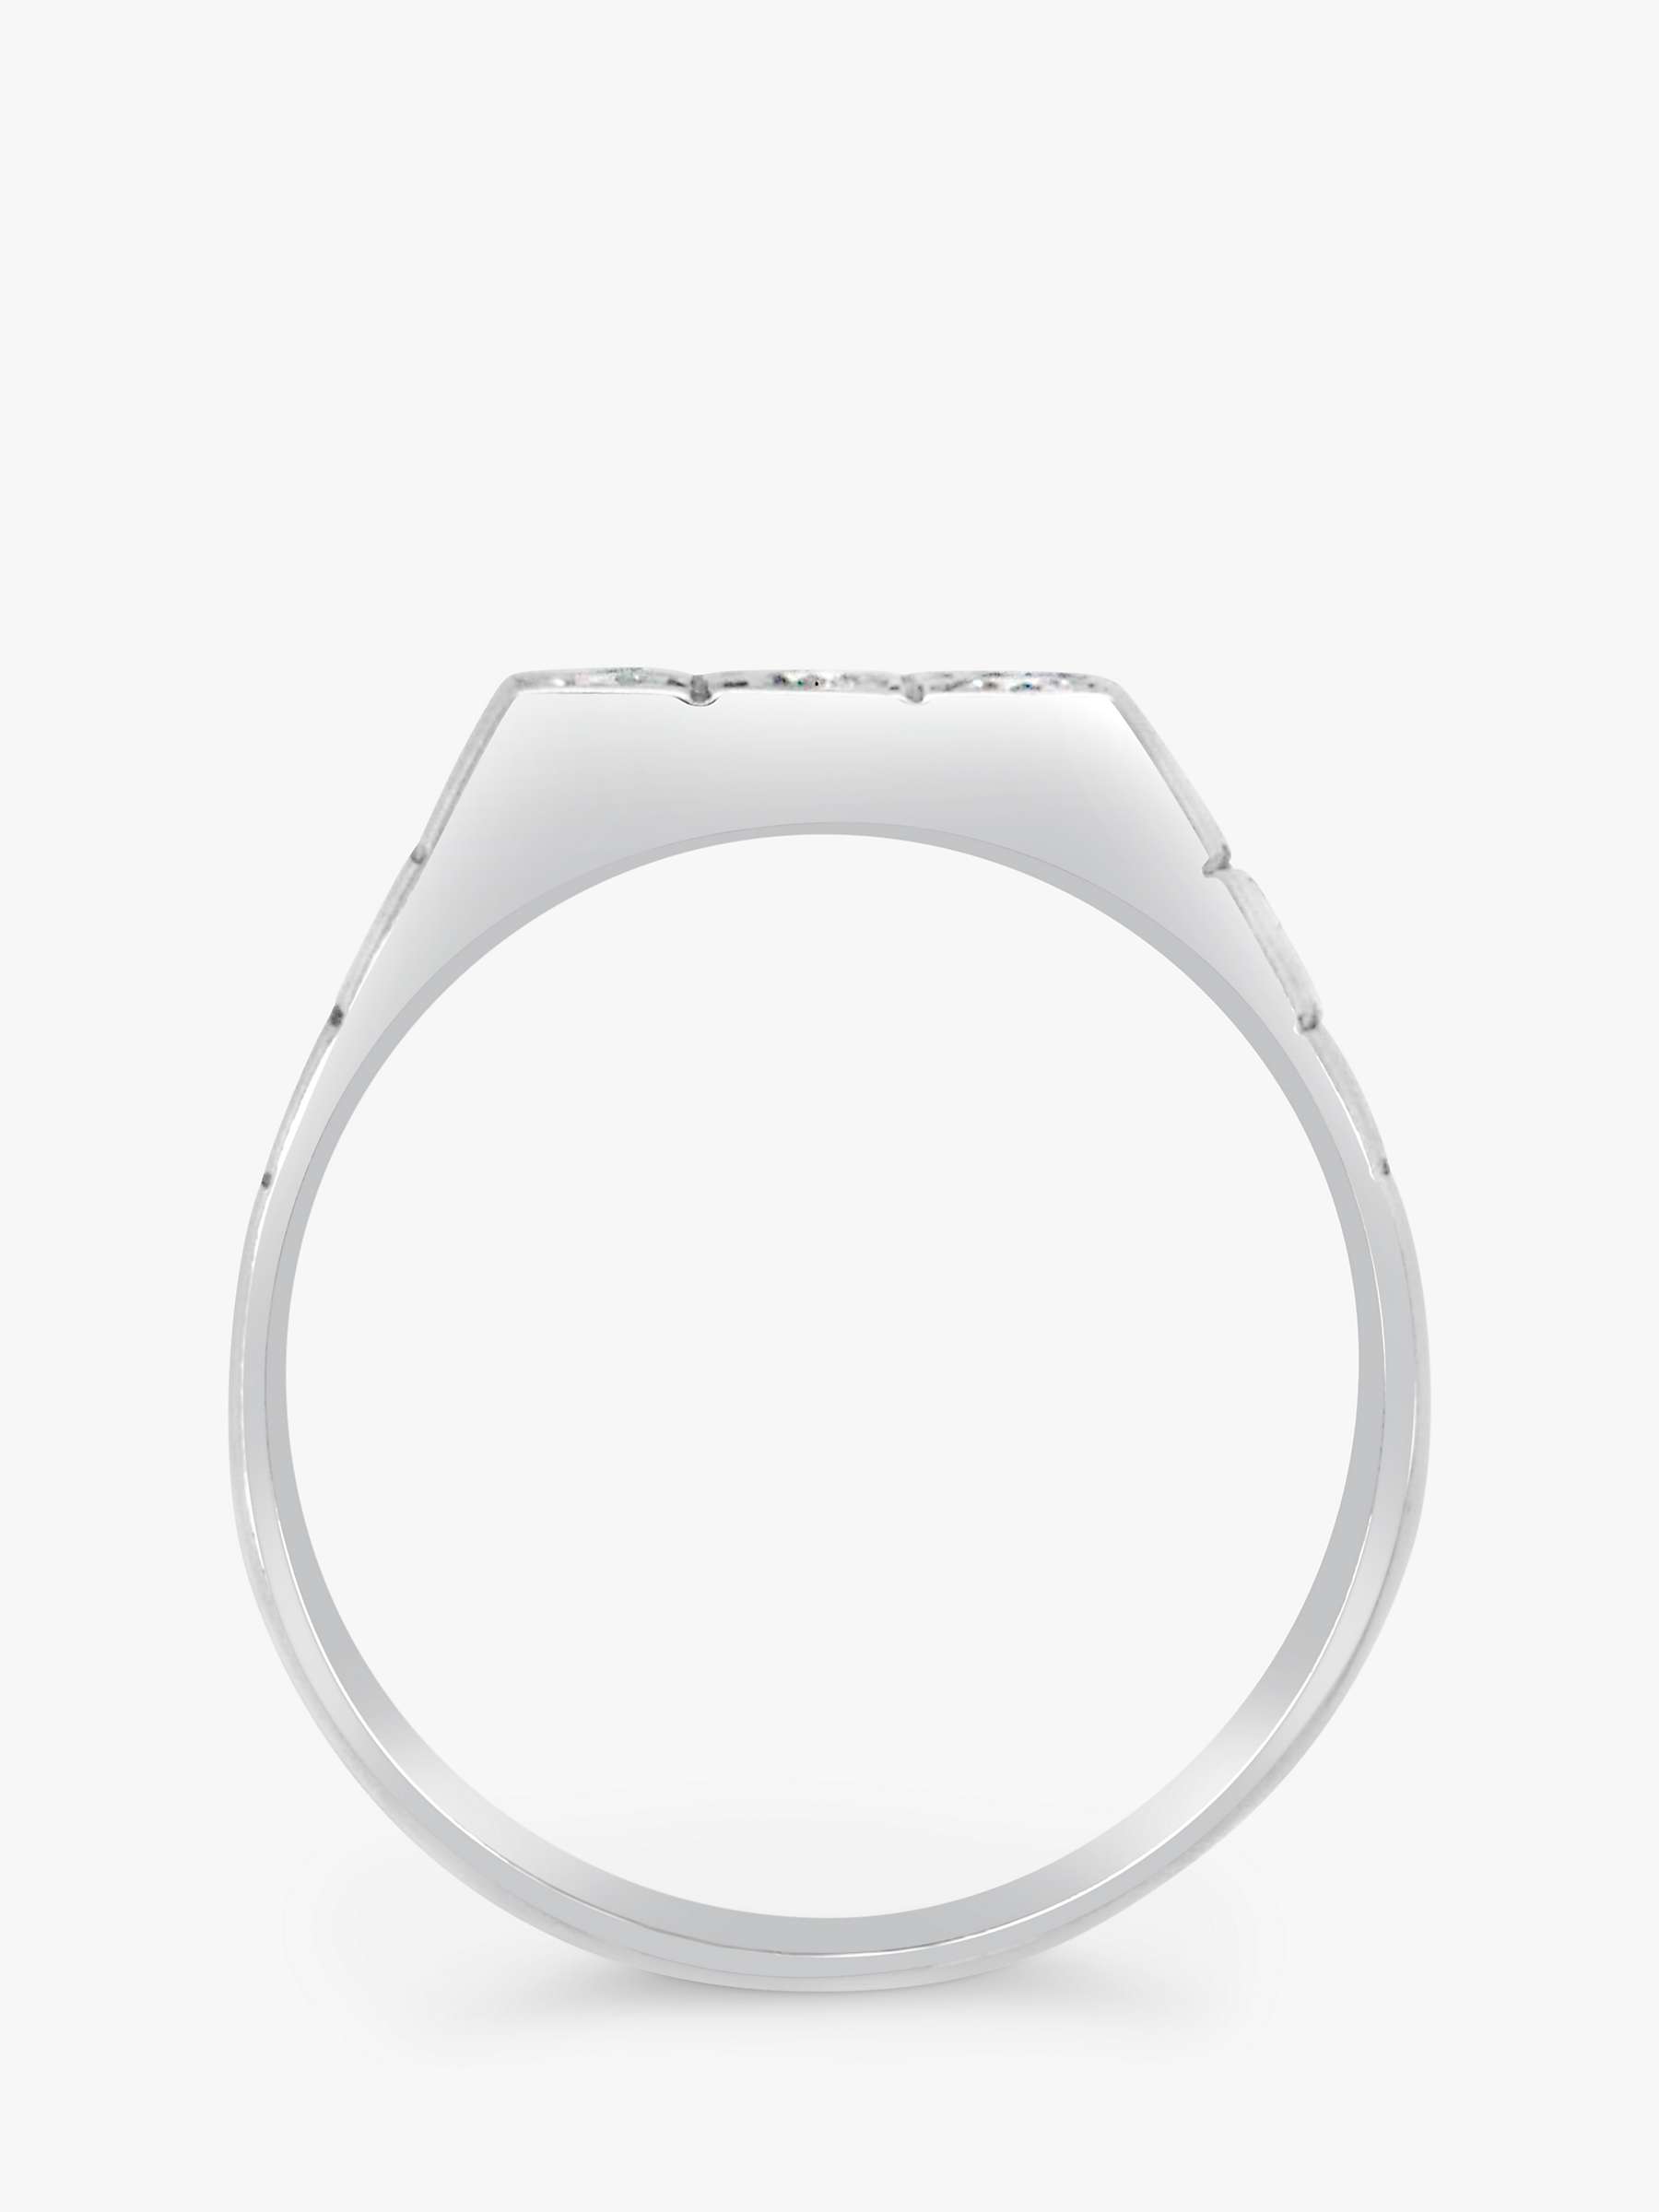 Buy Milton & Humble Jewellery Second Hand 14ct White Gold Flat Top Diamond Ring Online at johnlewis.com